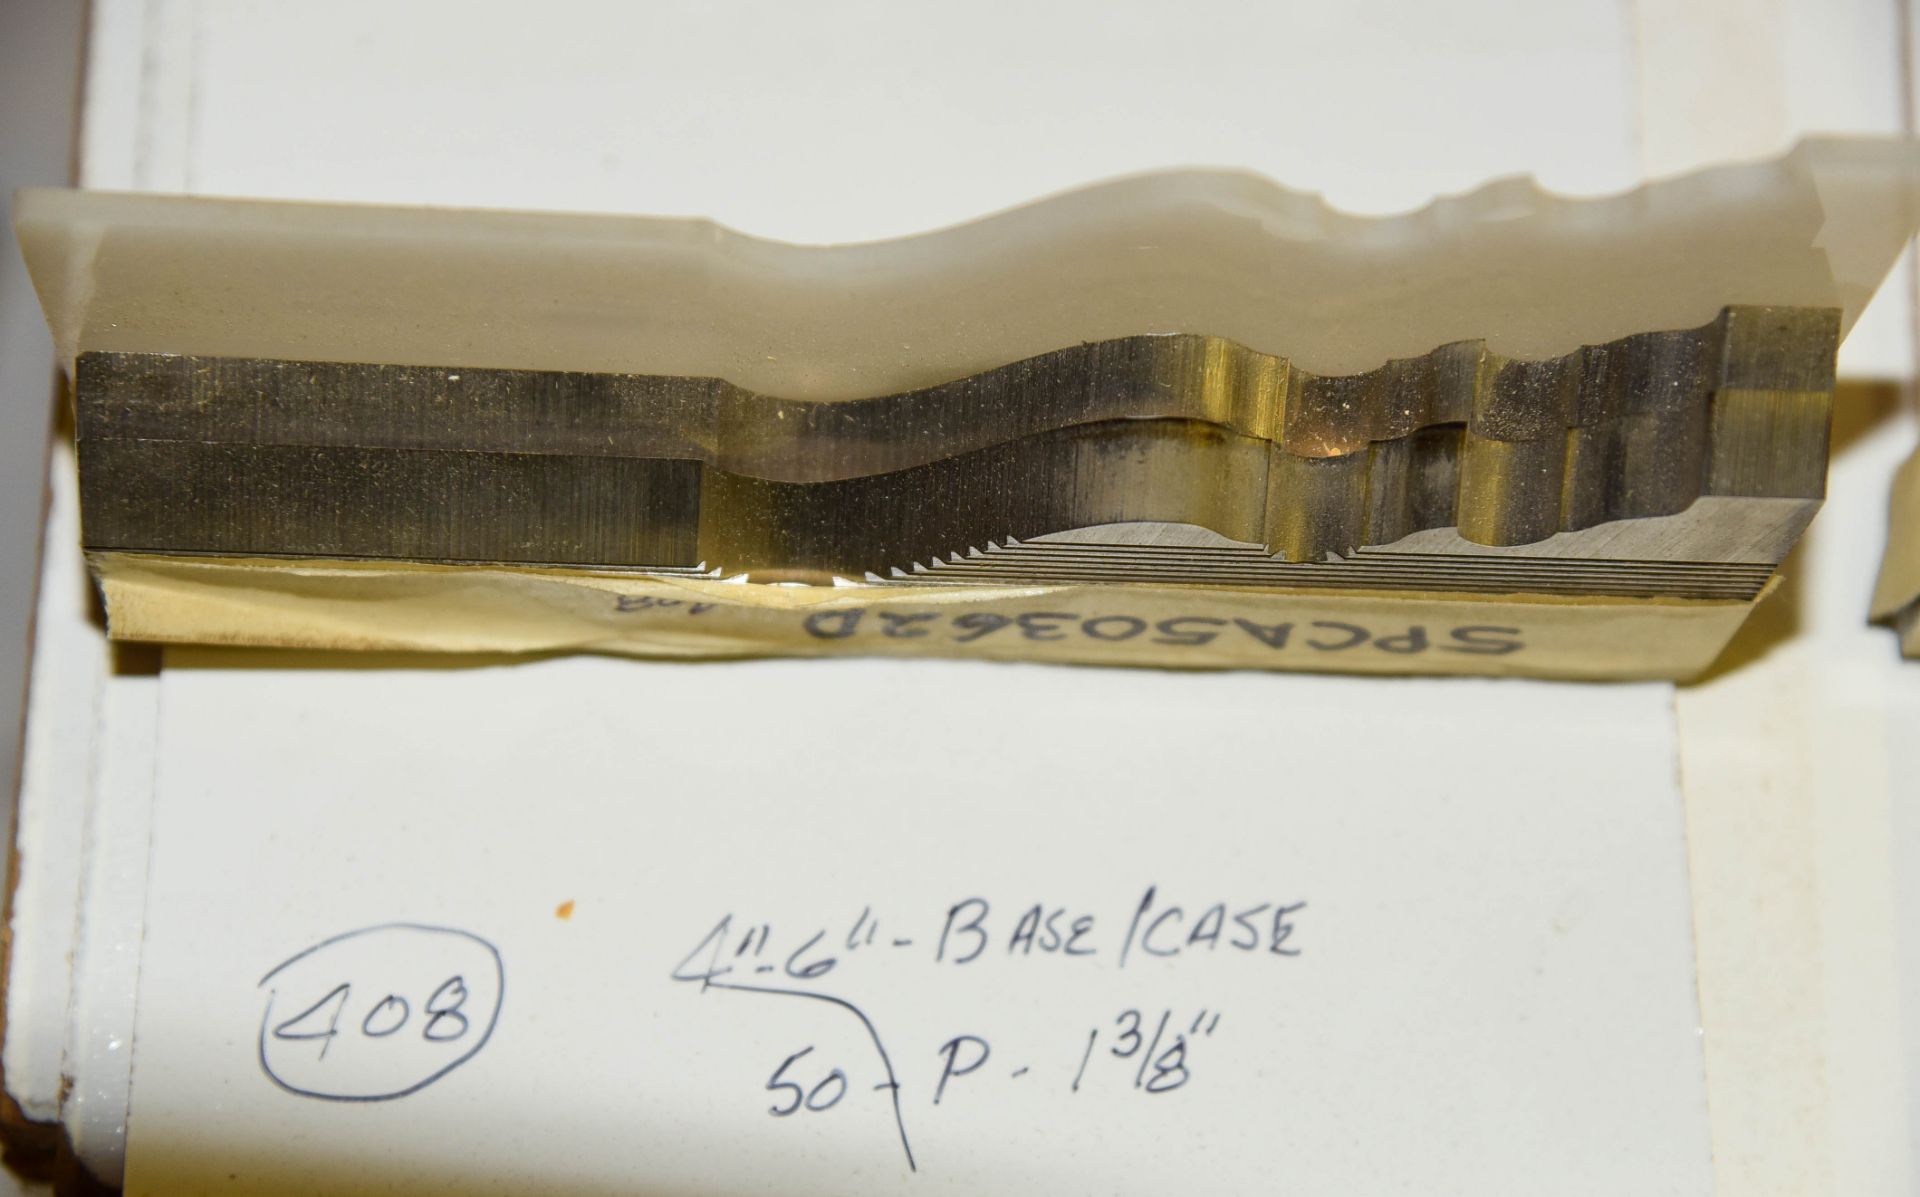 Moulding Knives, 4" - 6" Base/Case, 50 - P = 1-3/8", Knives are in Good Condition and Ready to Us - Image 2 of 2